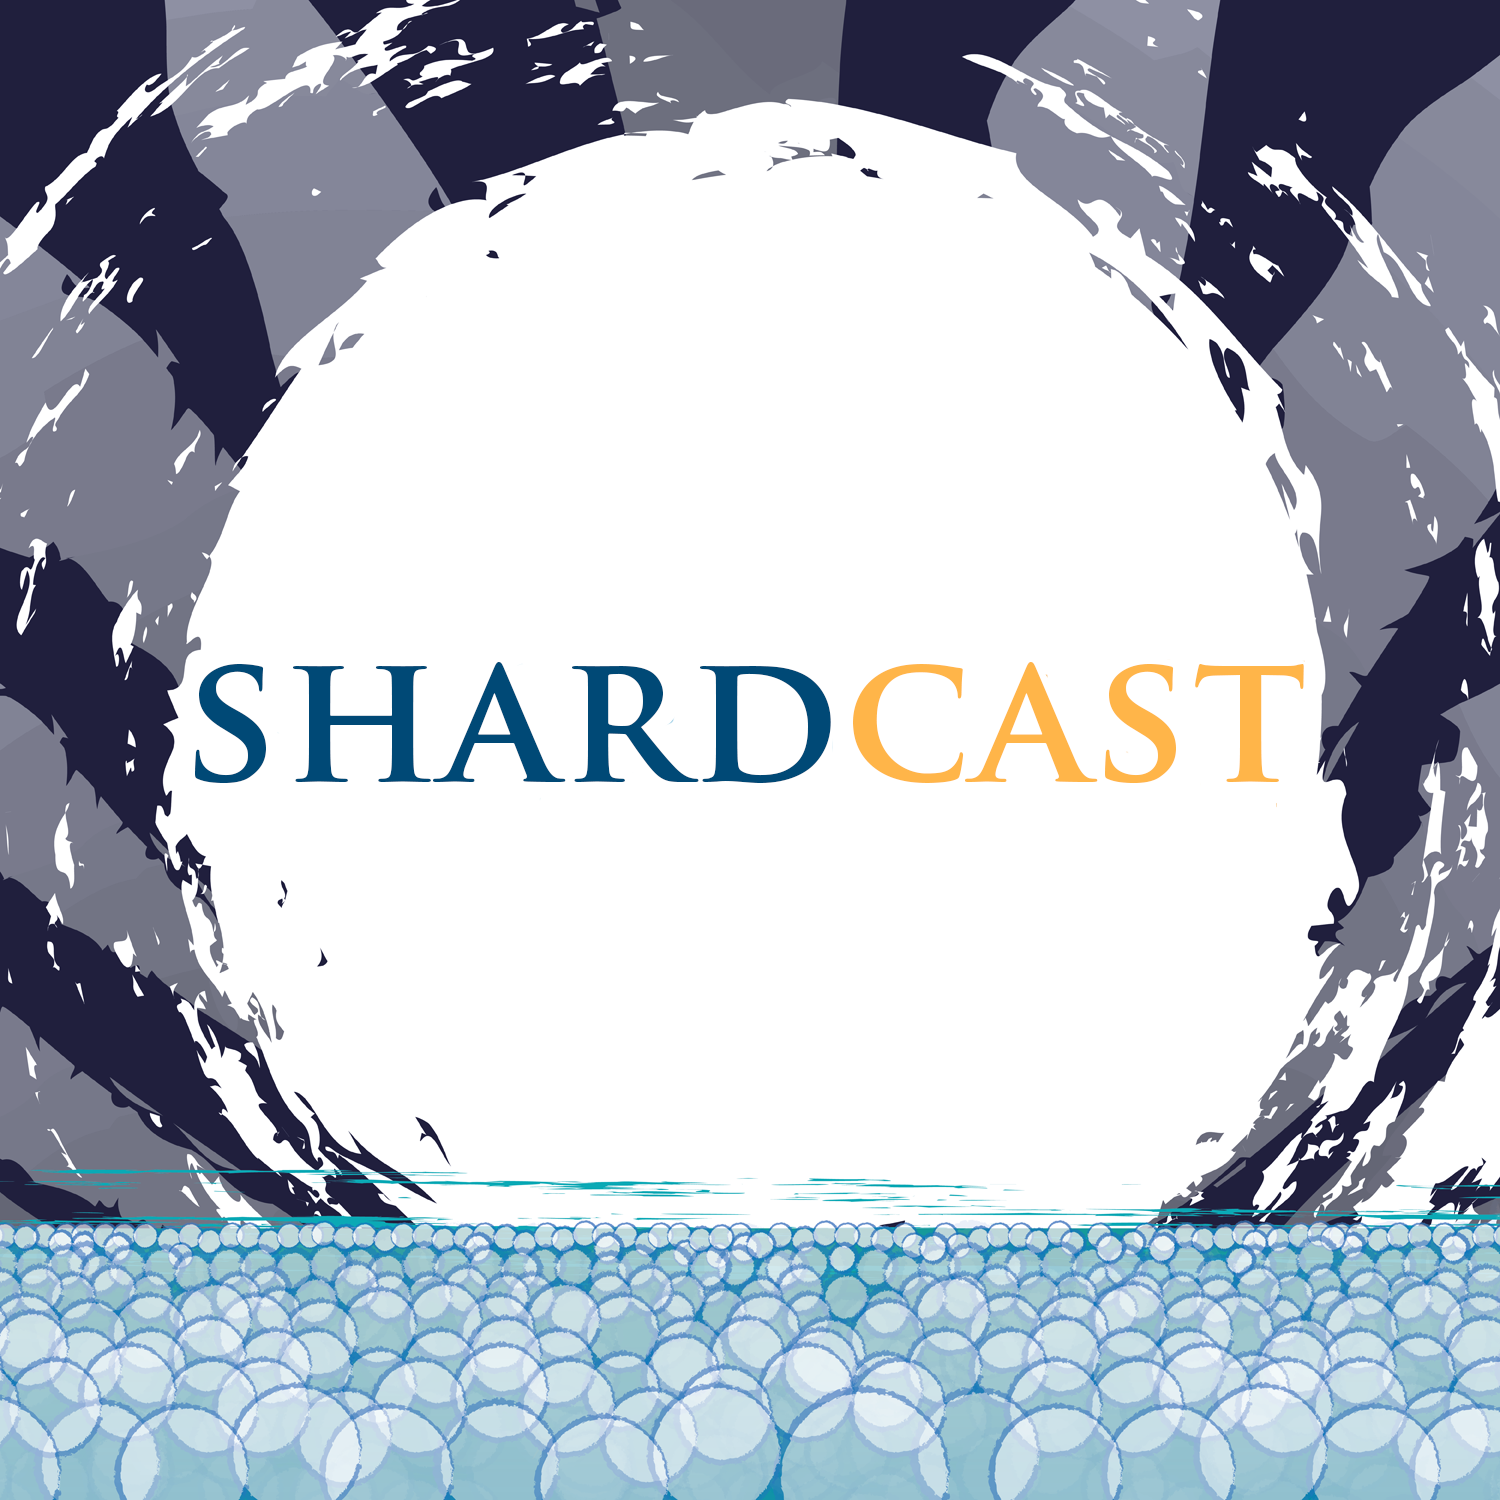 More information about "Shardcast: Silver Killing Spren!? June 2022 Spoiler Stream WoBs P1"